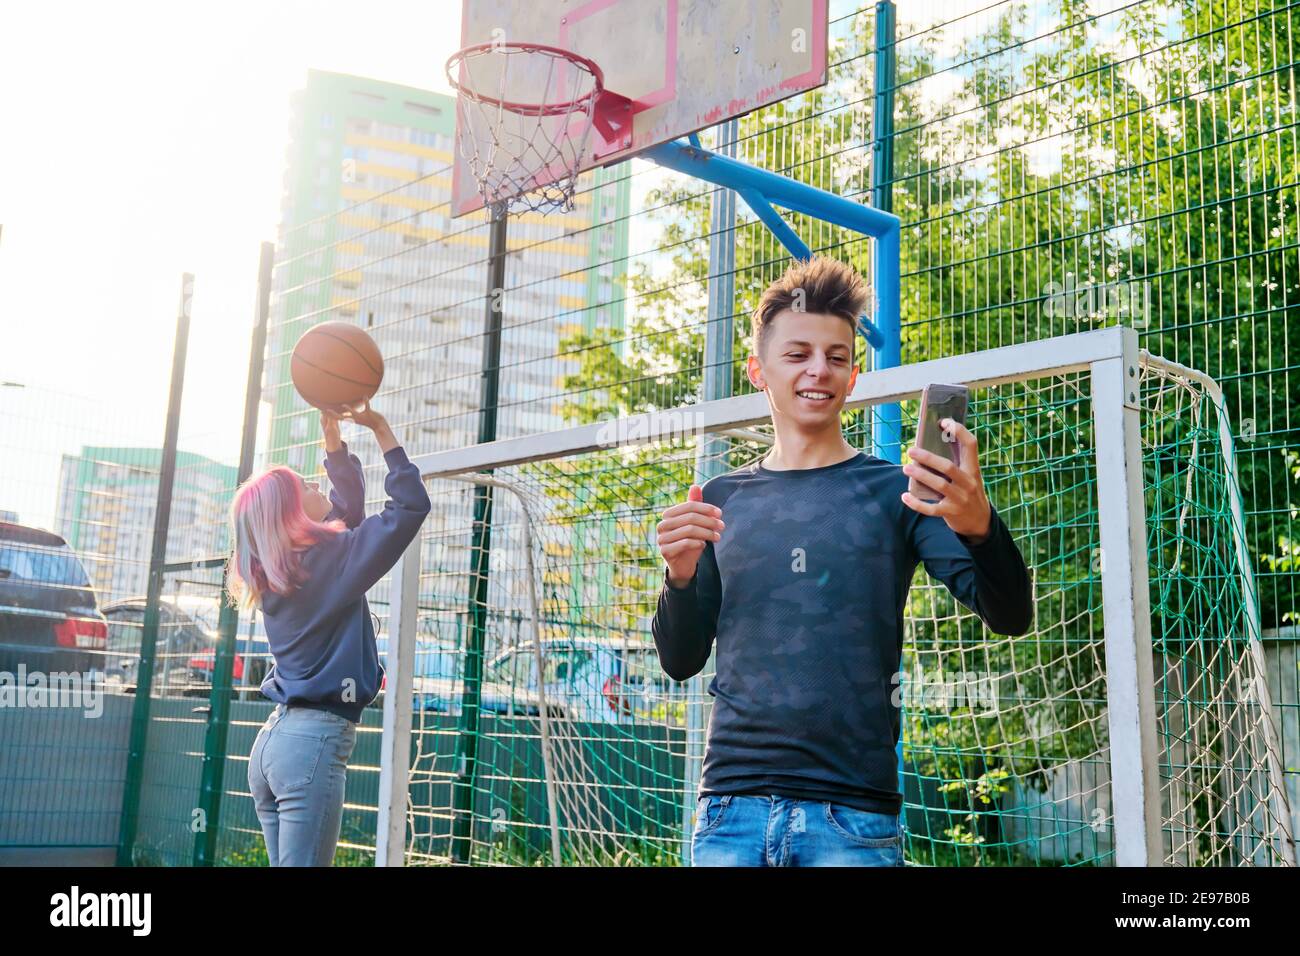 Guy teenager recording video stream using smartphone, on sports street court, girl playing basketball Stock Photo